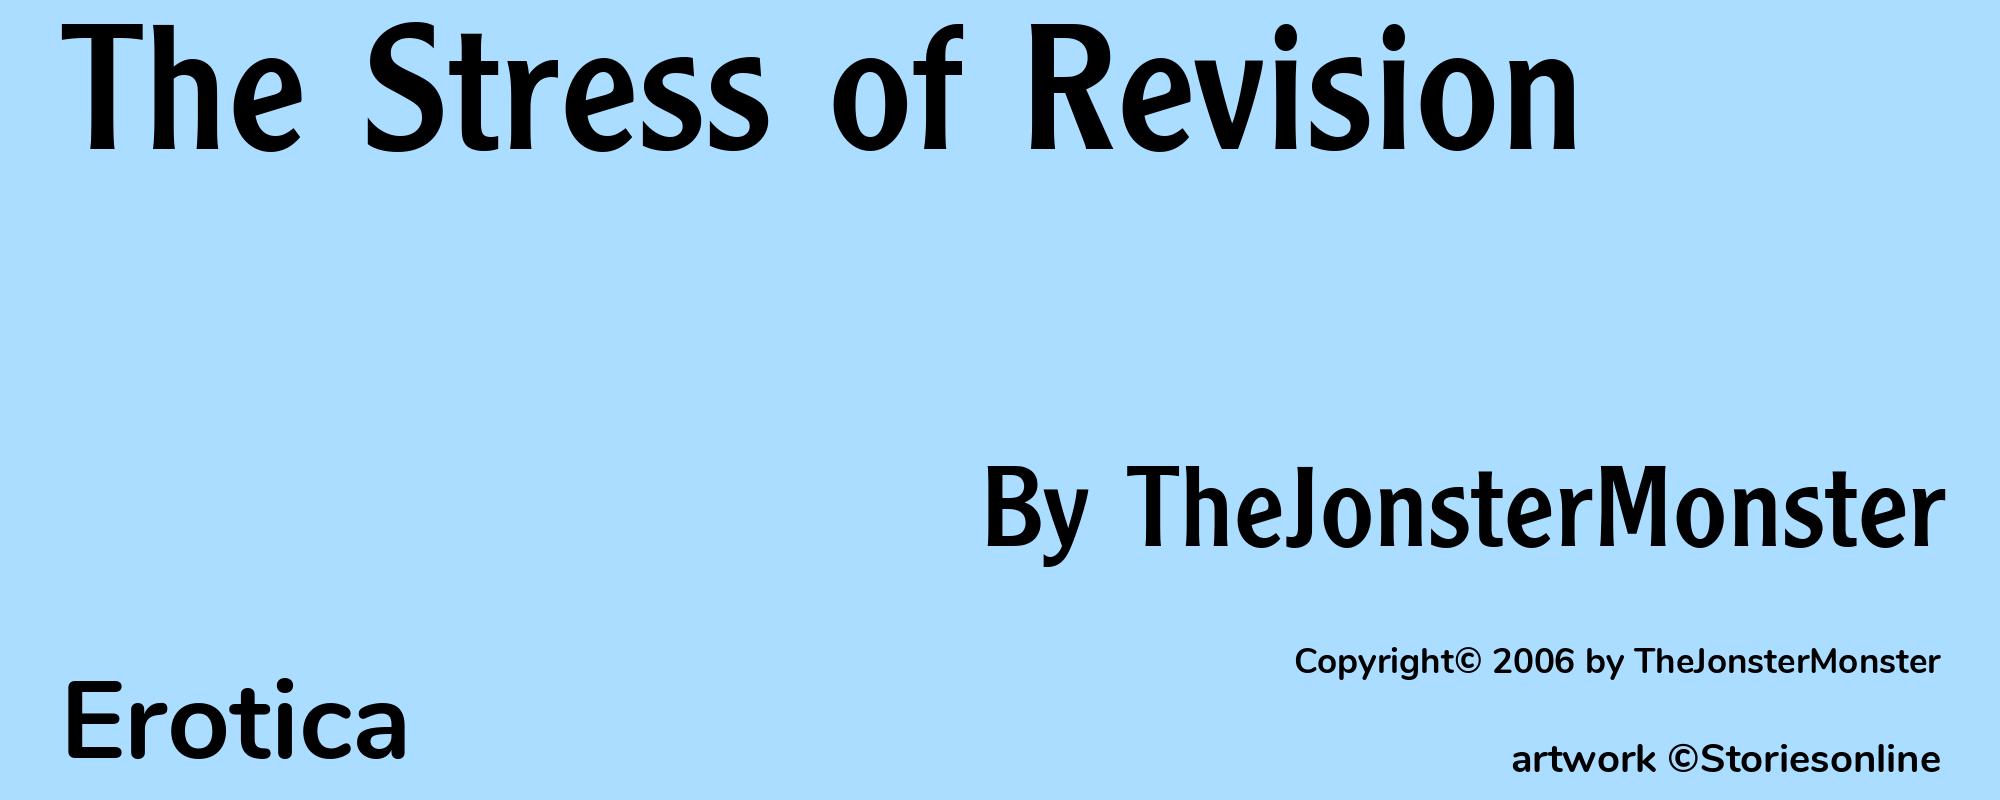 The Stress of Revision - Cover